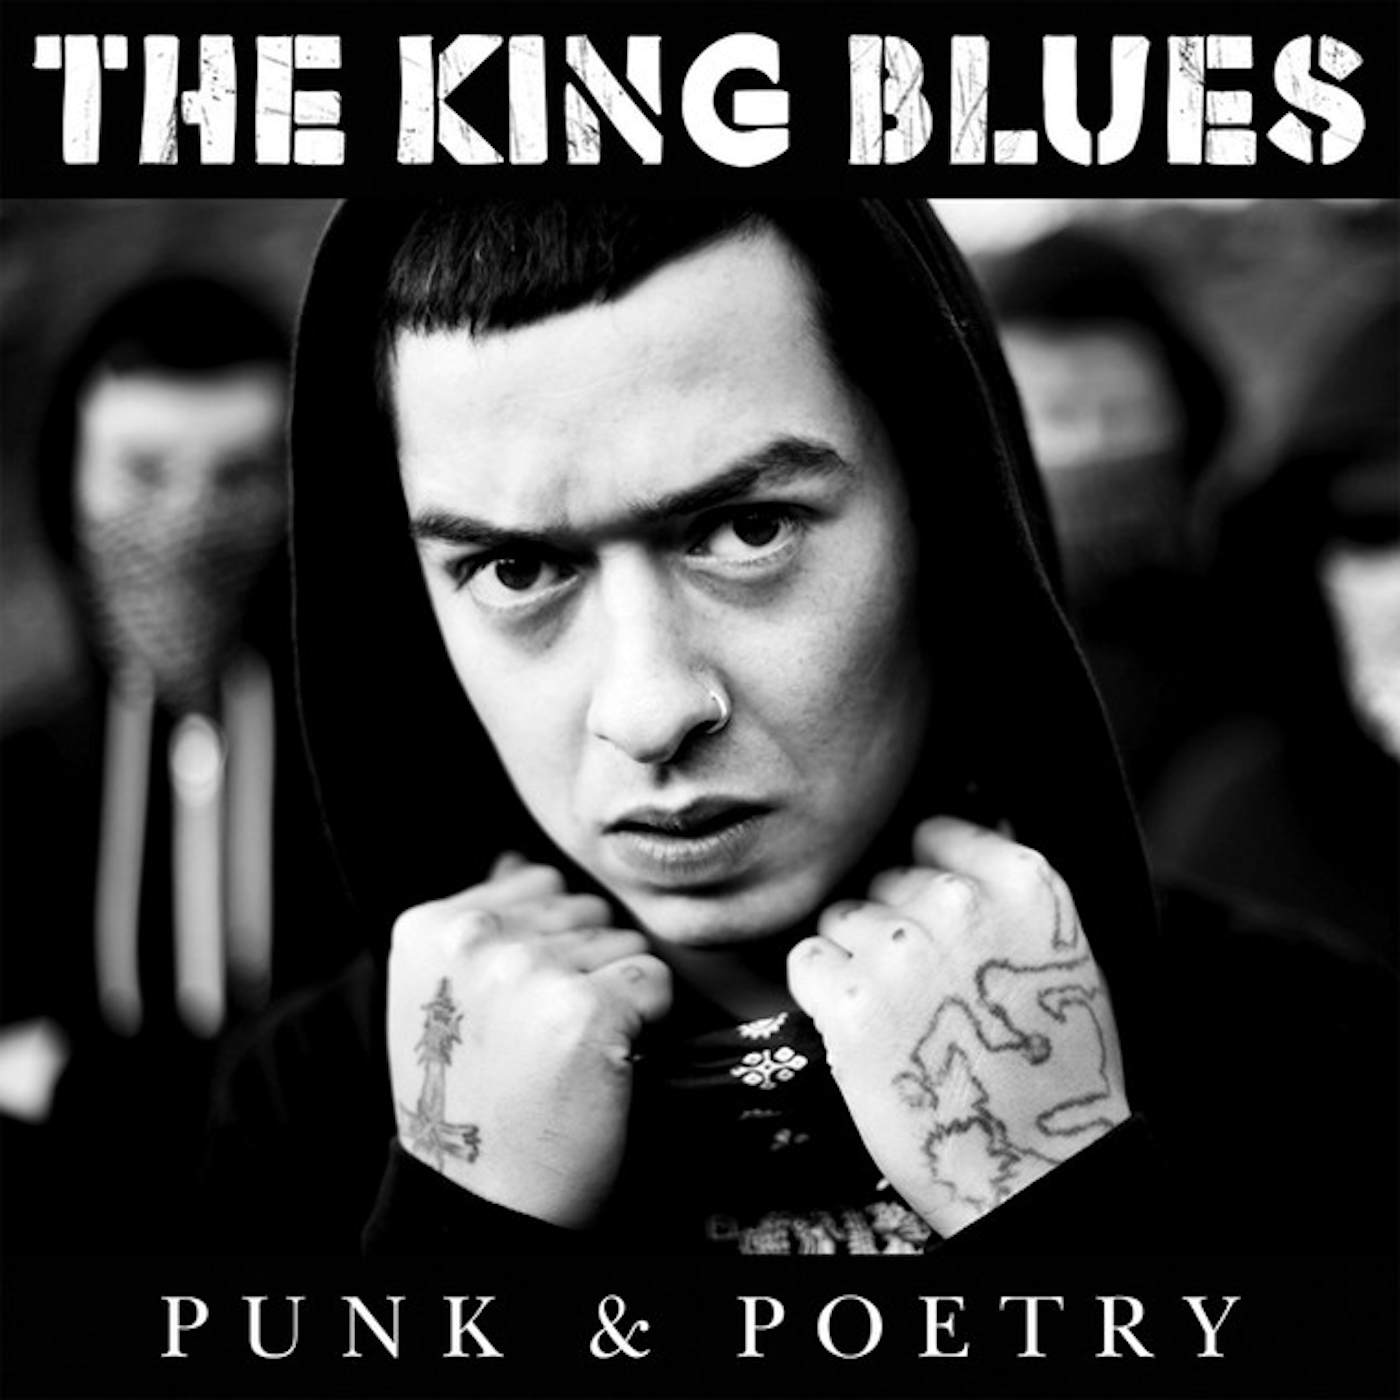 The King Blues Punk & Poetry Vinyl Record